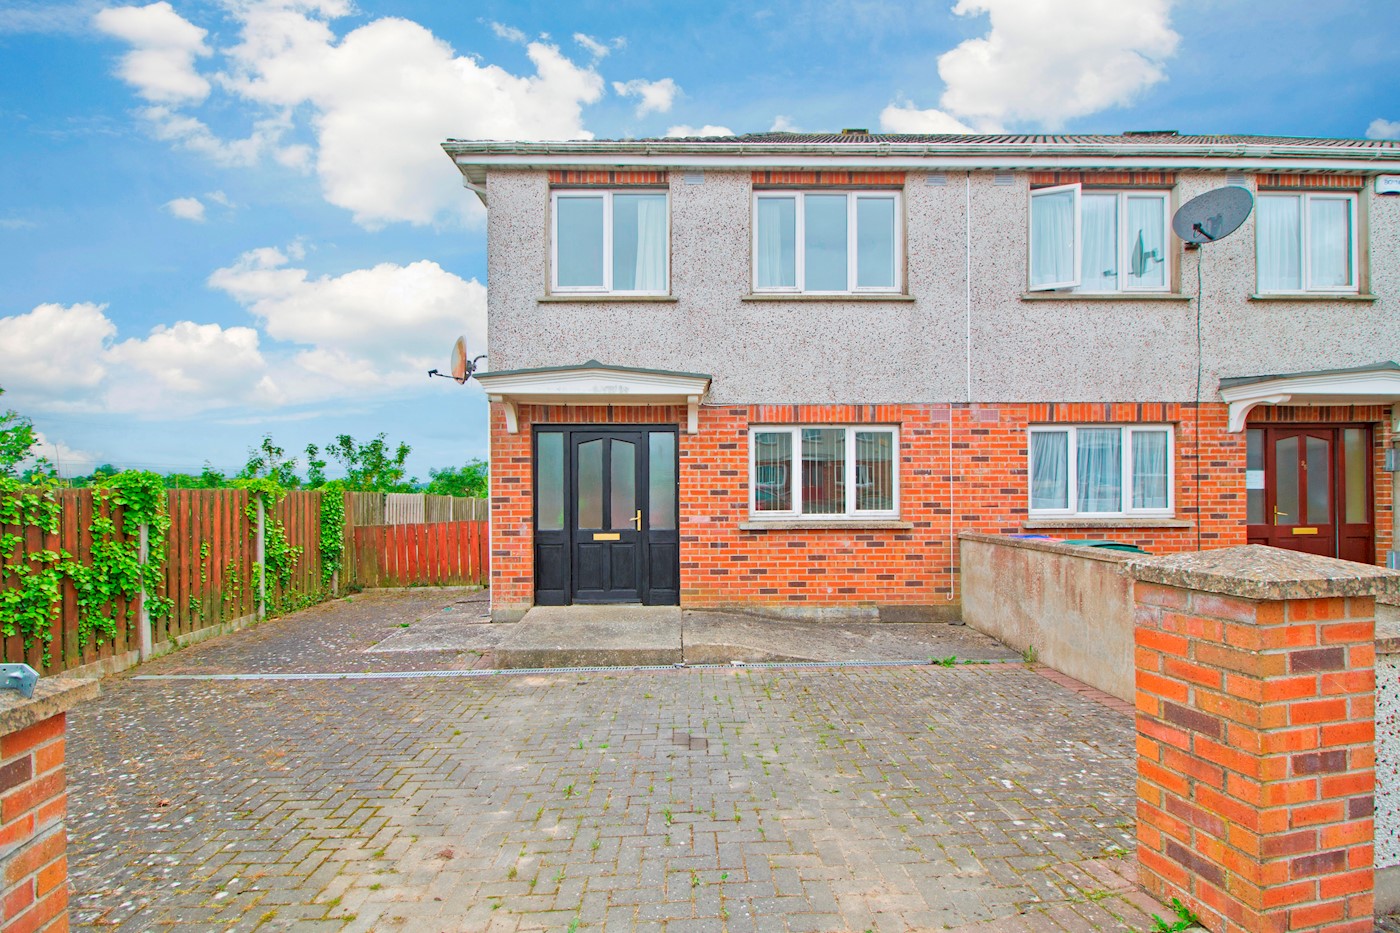 26 Woodgrove Heights, Battsland, Dunleer, Co. Louth, A92 C5Y8 1/18